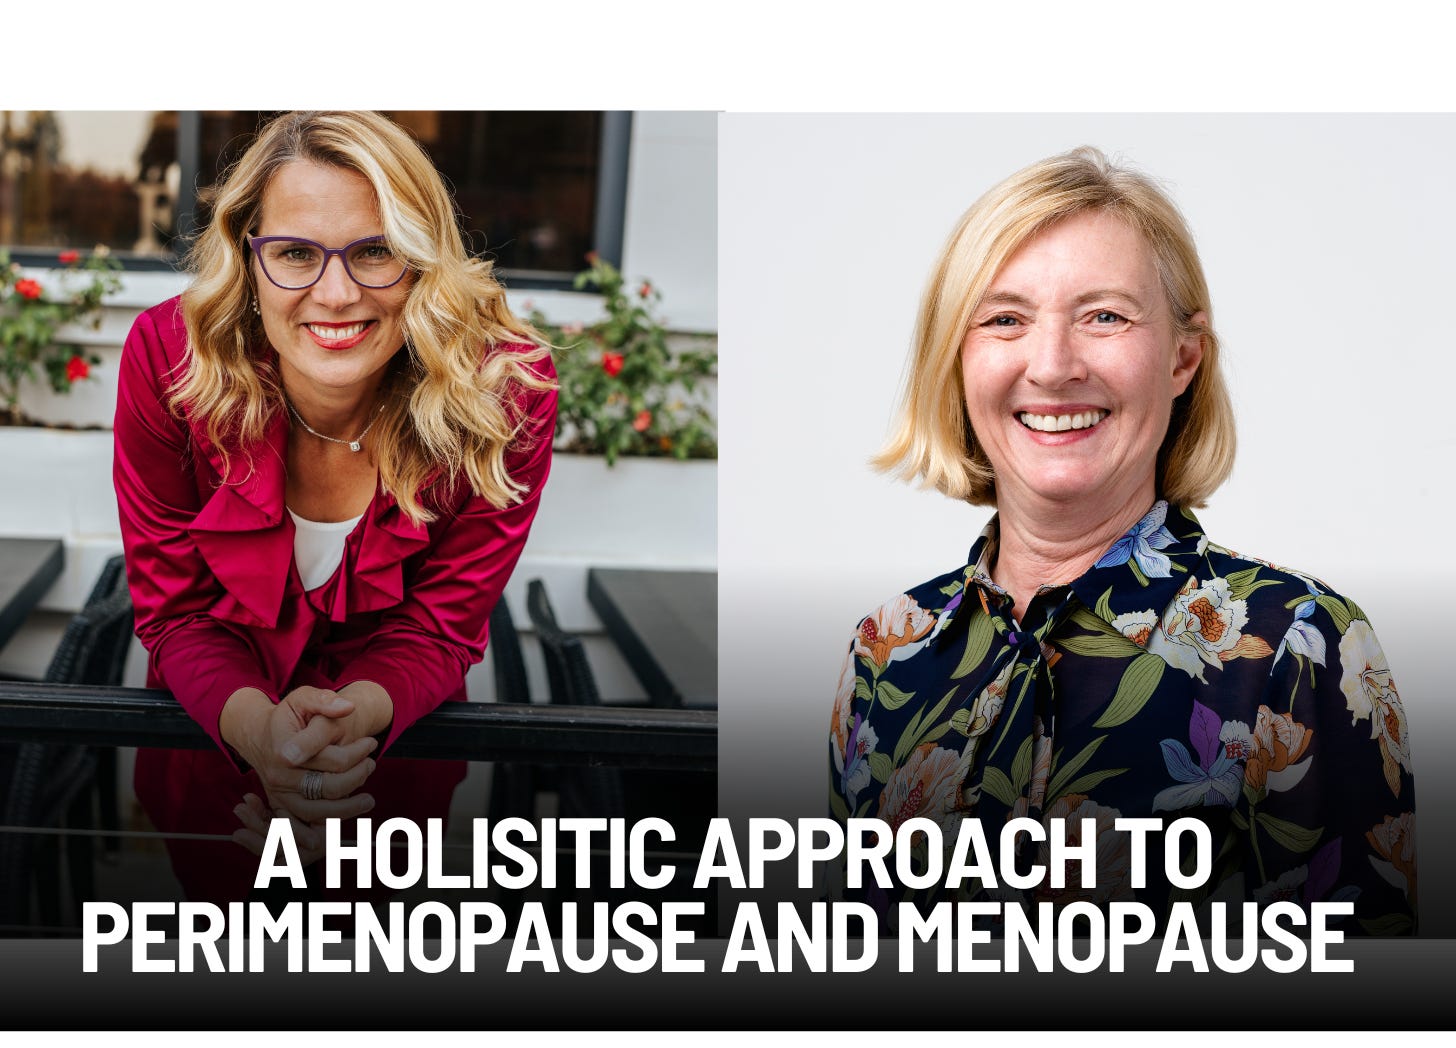 A Holistic Approach to Perimenopause and Menopause